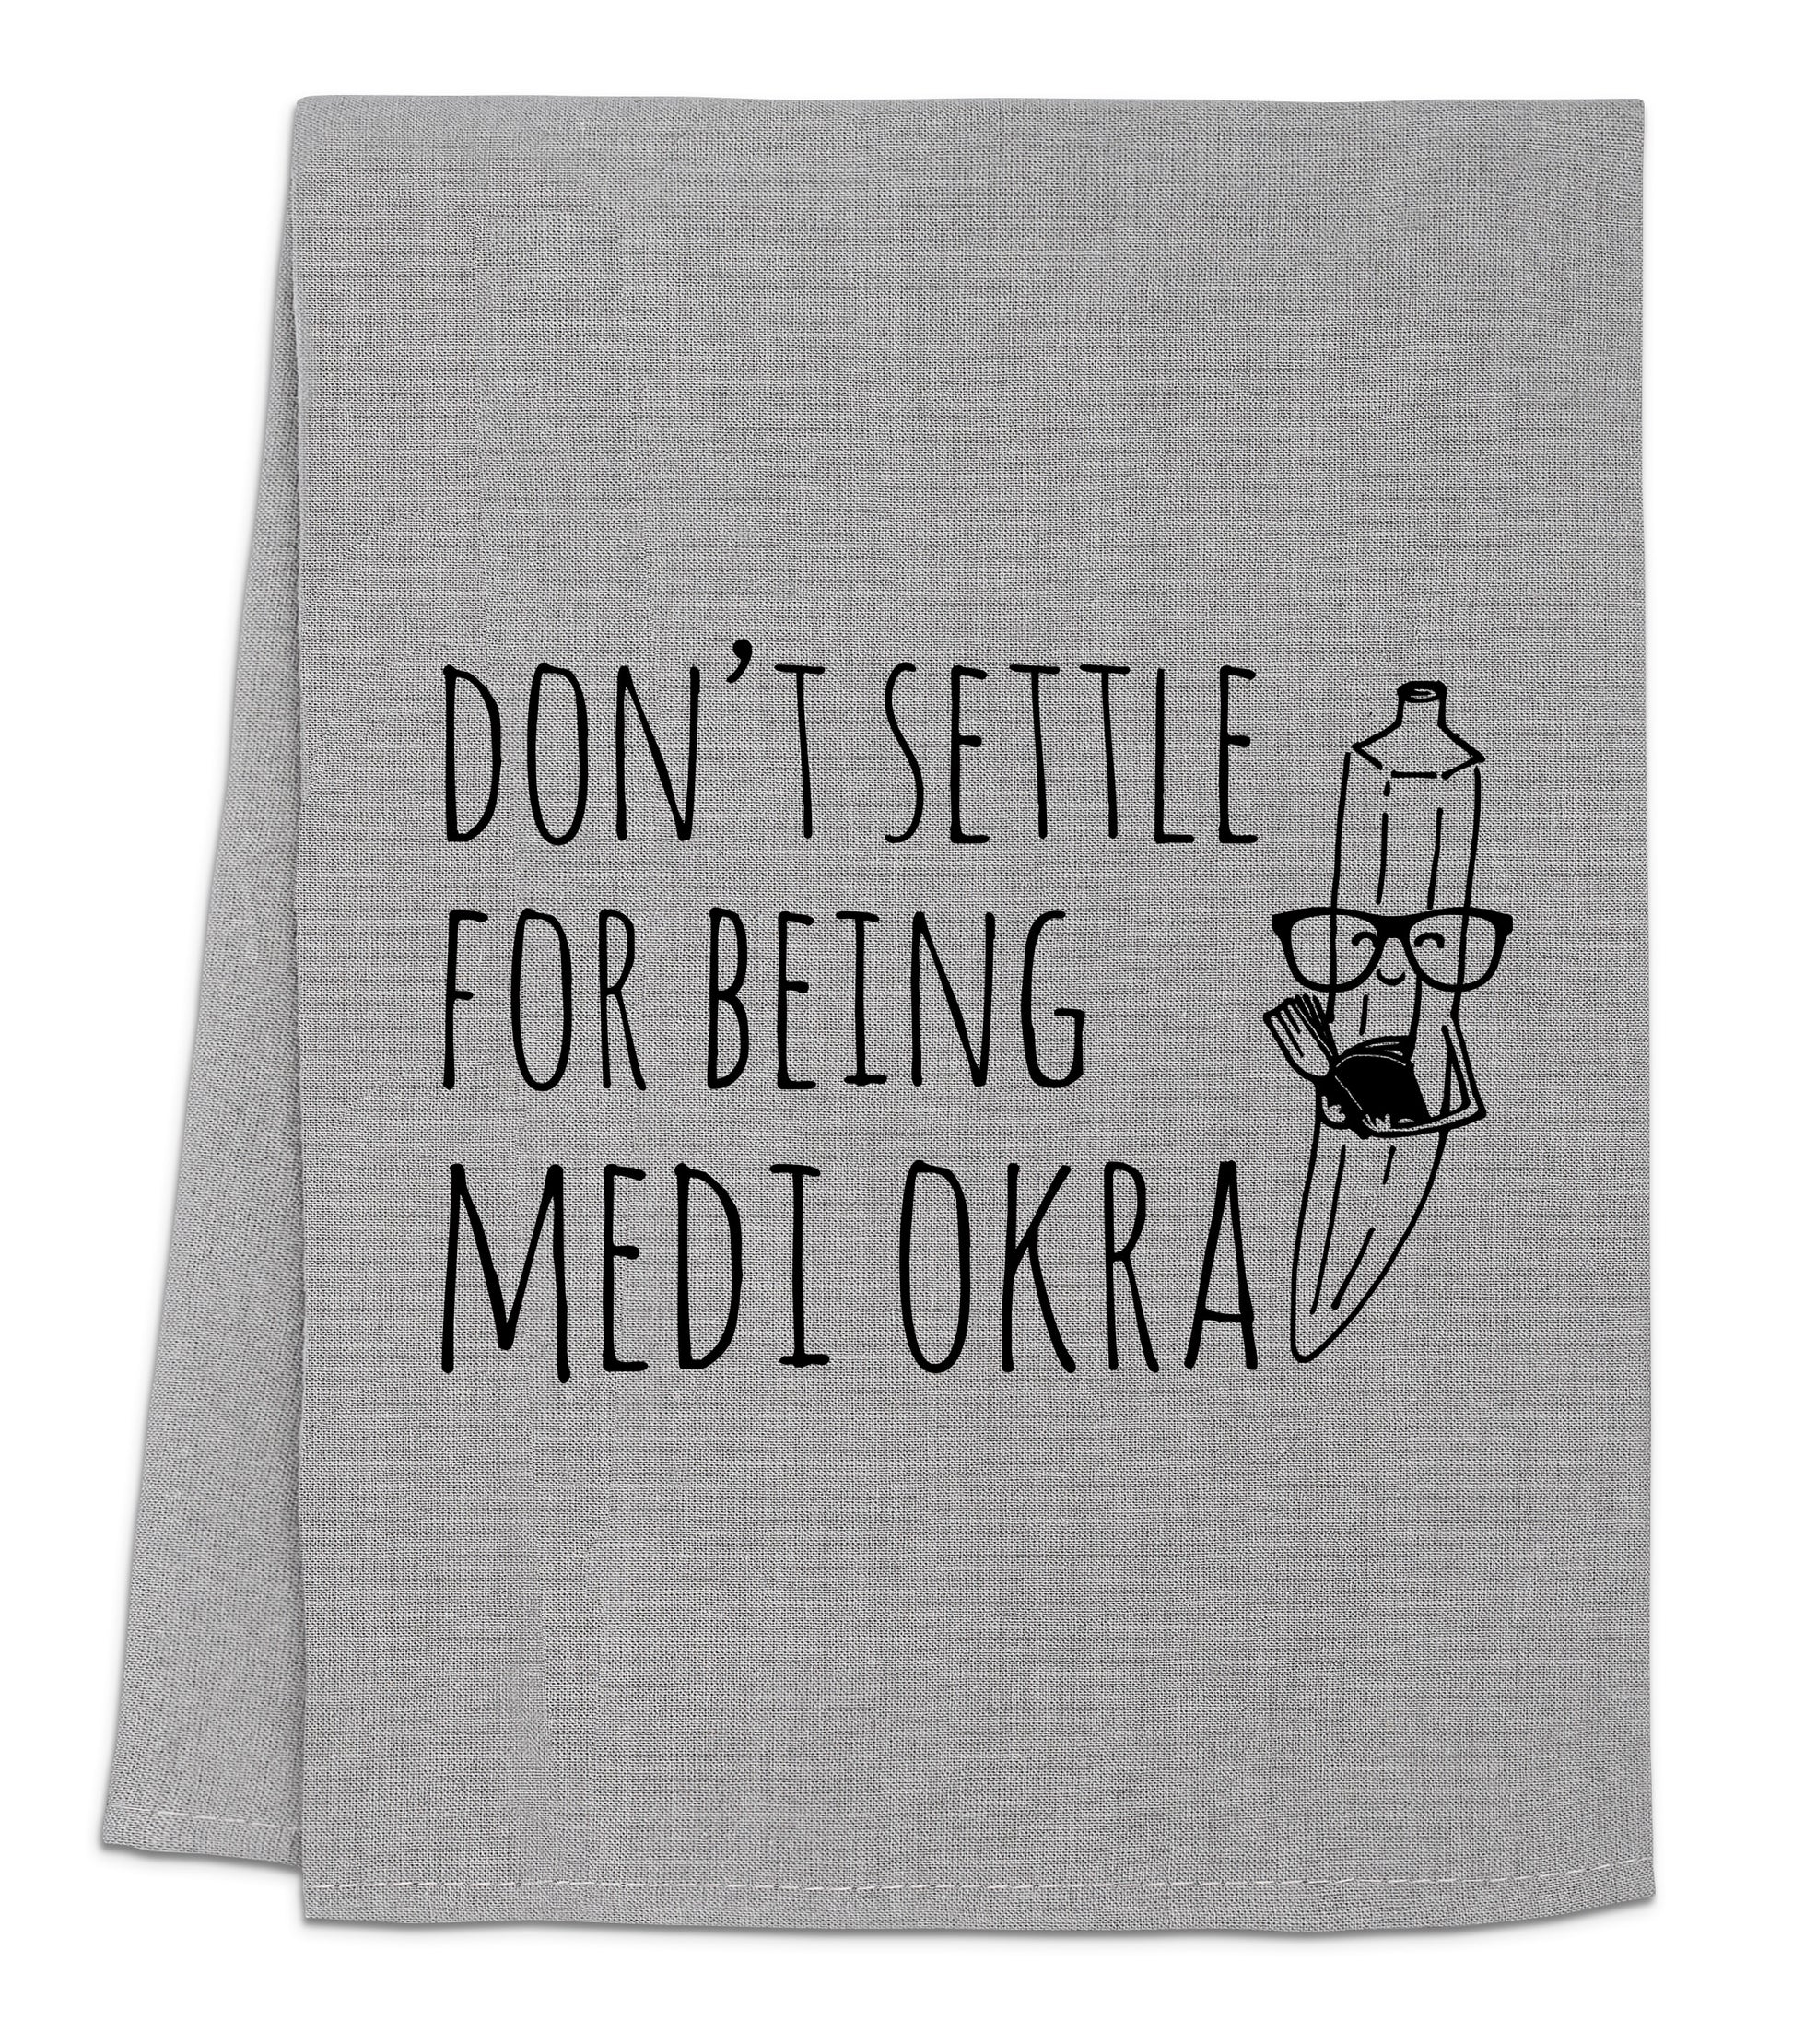 a towel that says don't seite for being medi okra